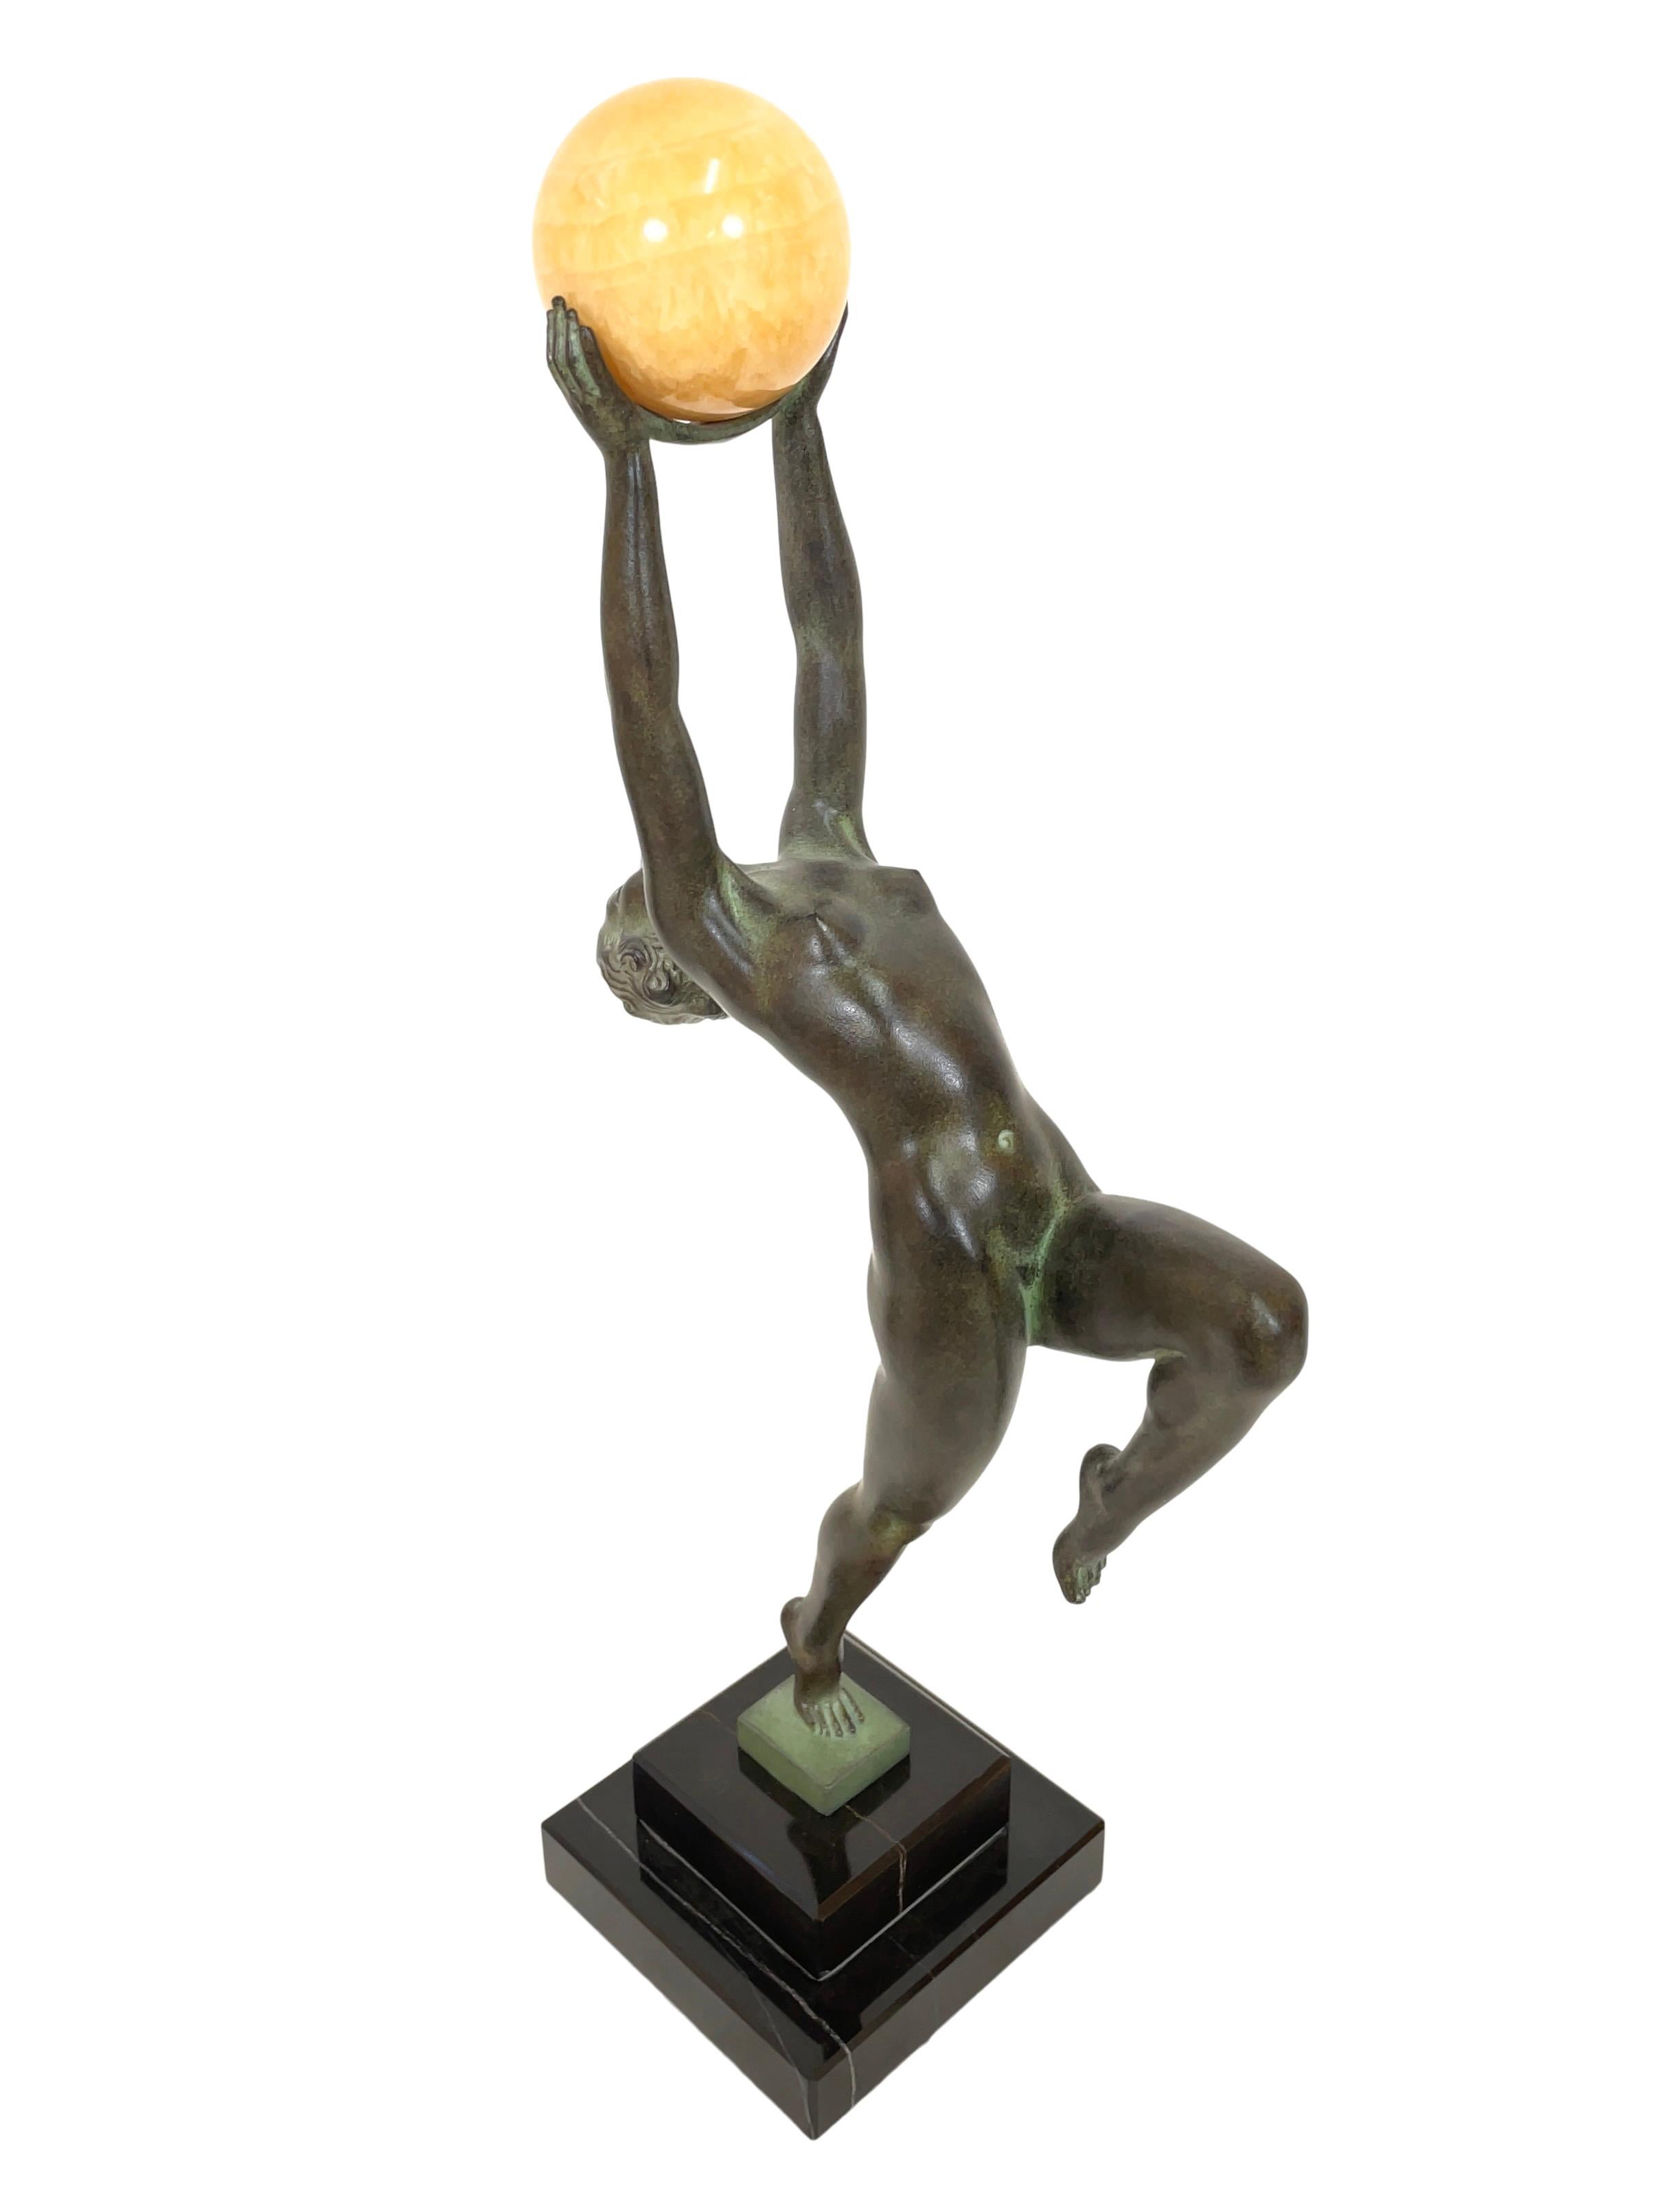 French Dancer Sculpture Jeu with a Jade Ball from Max Le Verrier in Art Deco Style